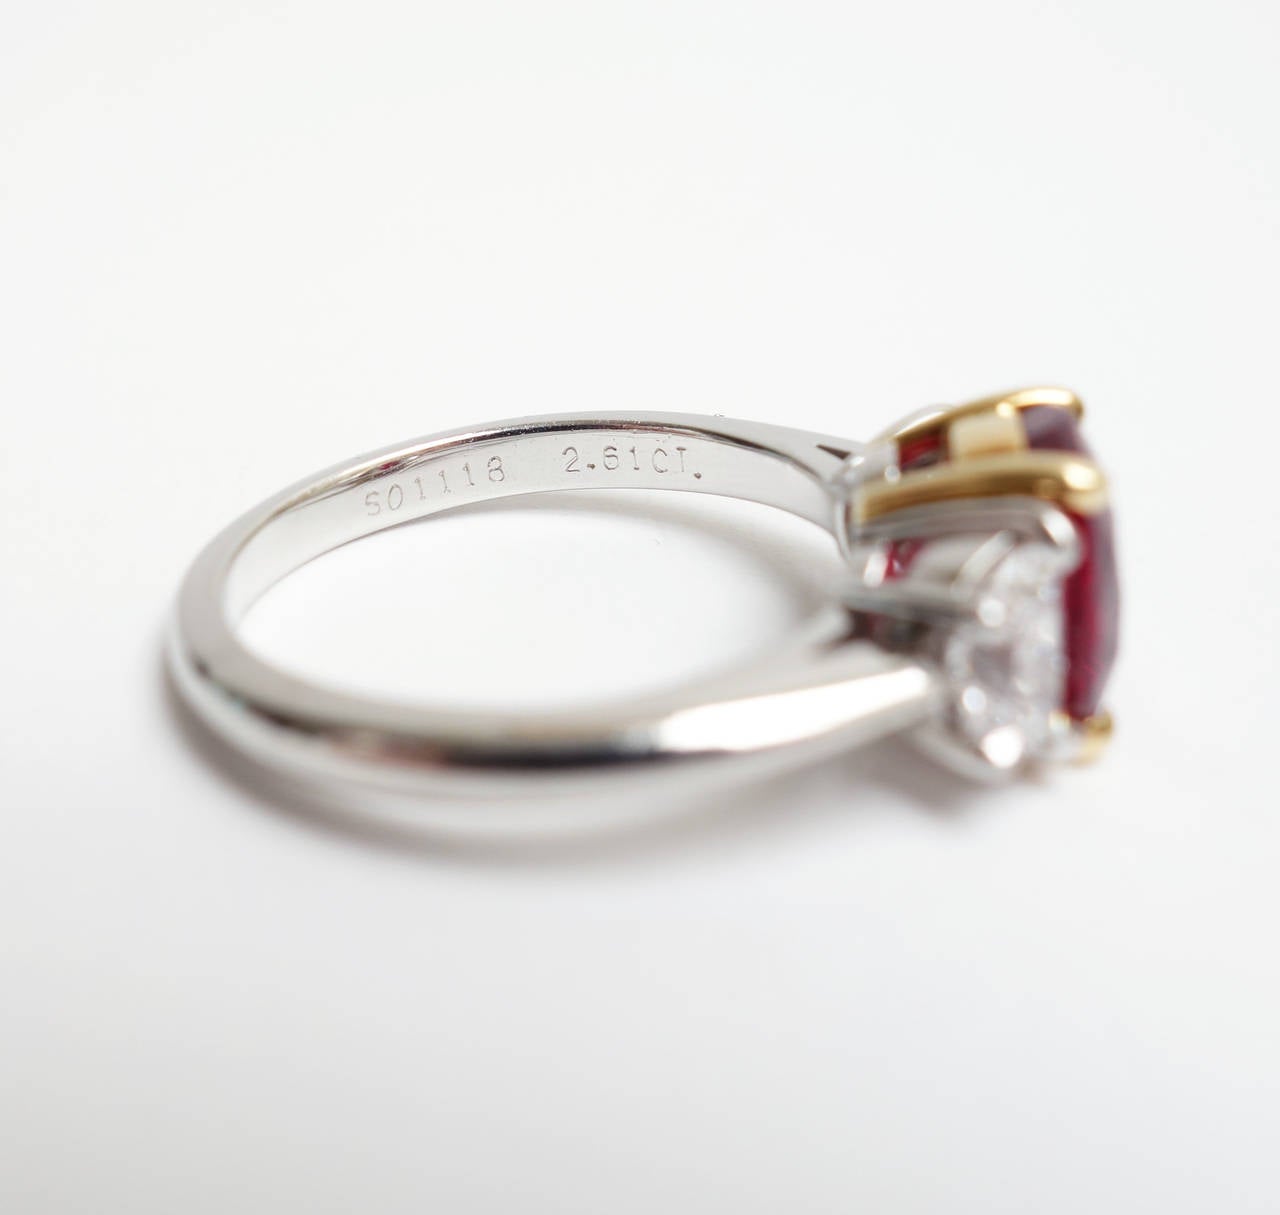 Classic elegance. a 2.61ct Burmese Ruby set in 18K yellow gold, accented by two half moon cut diamonds set in platinum.  The ring originaly sold by Tiffany & Co. as not treated. Tiffany & Co. appraisal included with the original certificate.